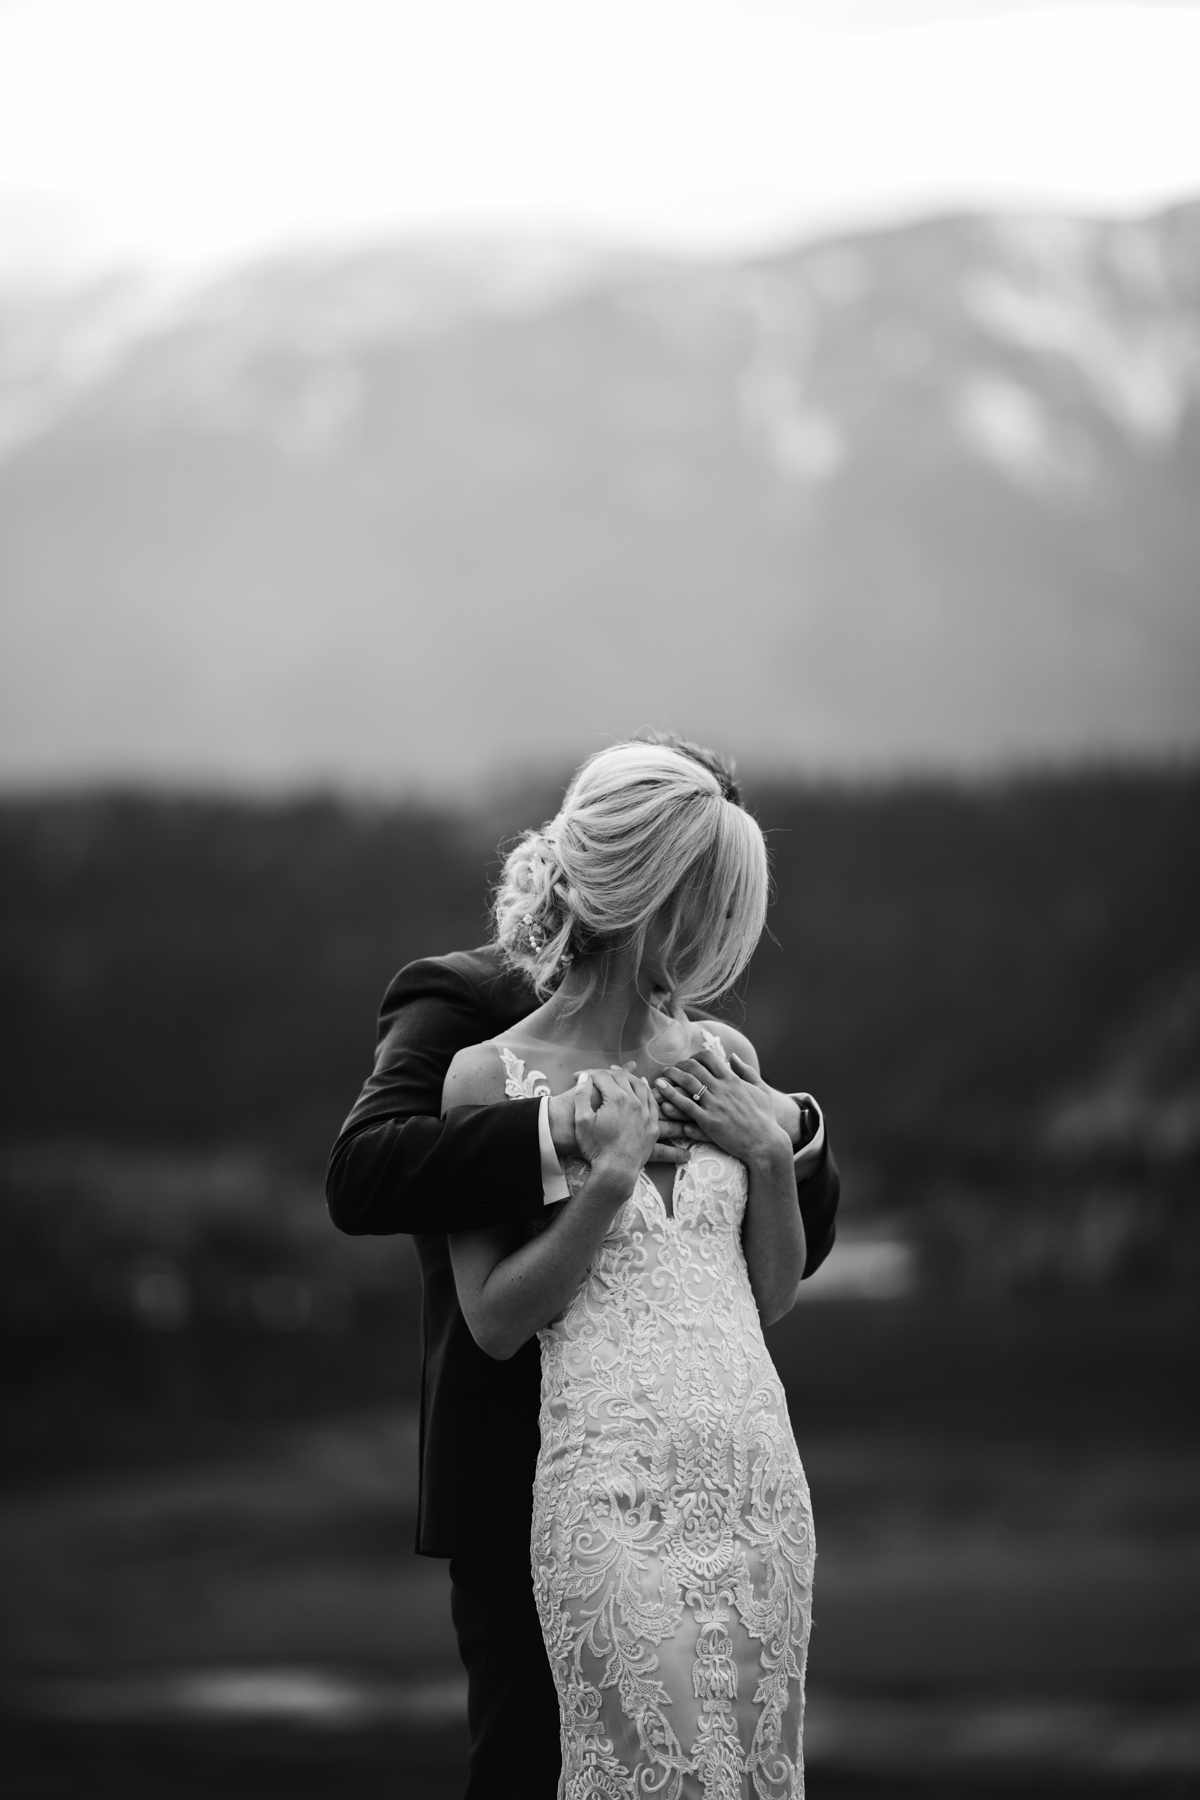 Calgary wedding photographer in Invermere for adventurous mountain destination elopement at Eagle Ranch Golf Resort, British Columbia - Image 26